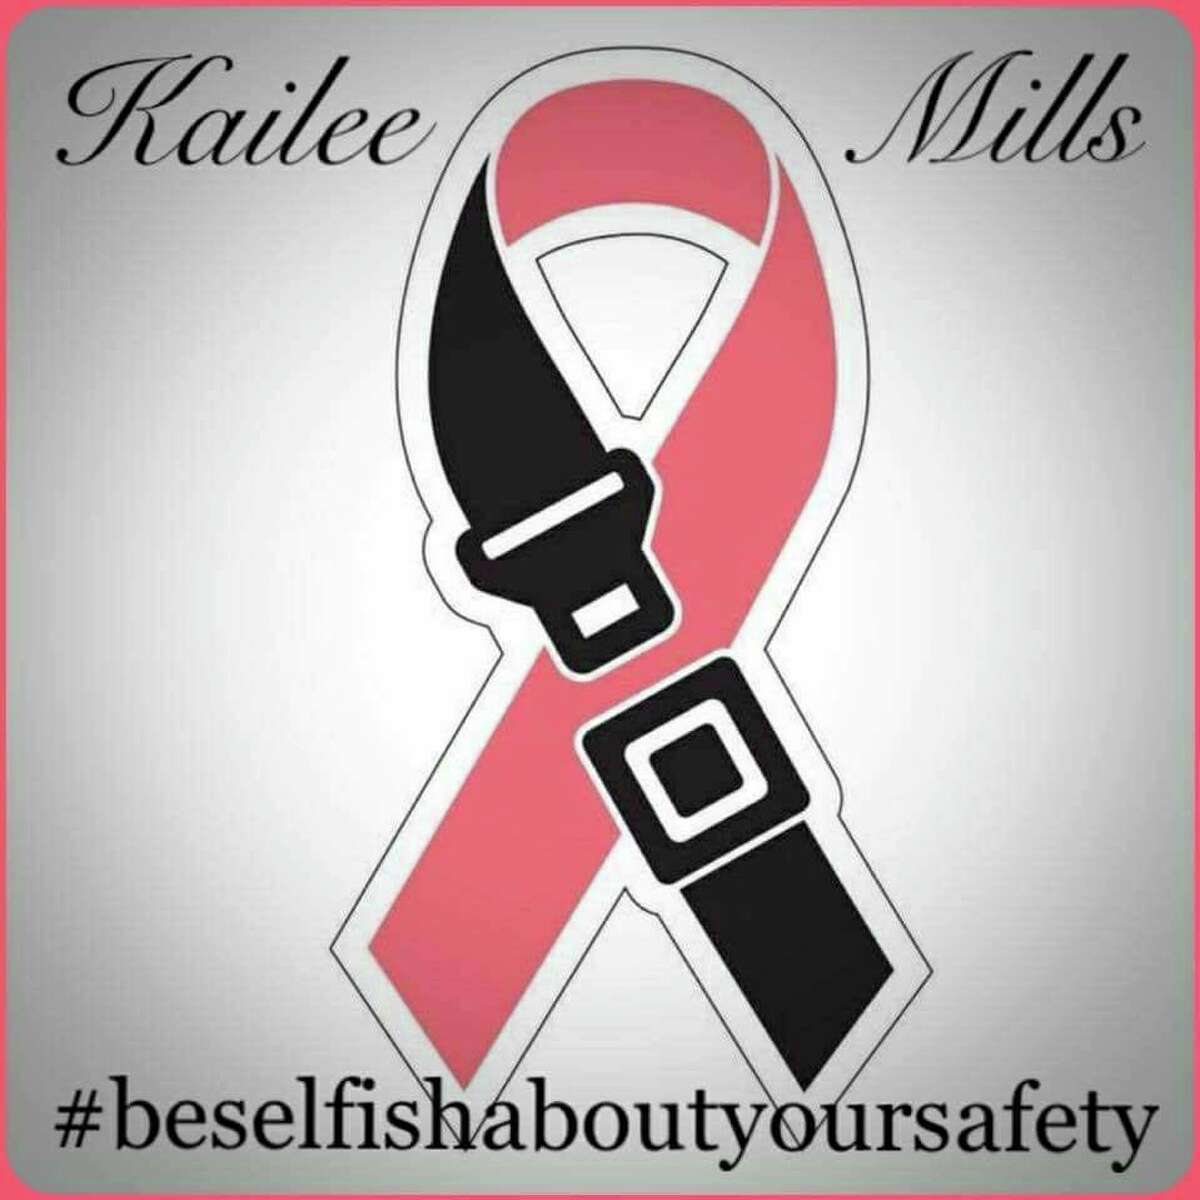 The Kailee Mills Foundation began after the teen, who was not wearing her seatbelt, died on Oct. 28 in a one-car vehicle rollover just blocks from her home in Spring. Her father David Mills is holding a charity benefit to raise funds and awareness about seatbelt and traffic safety.